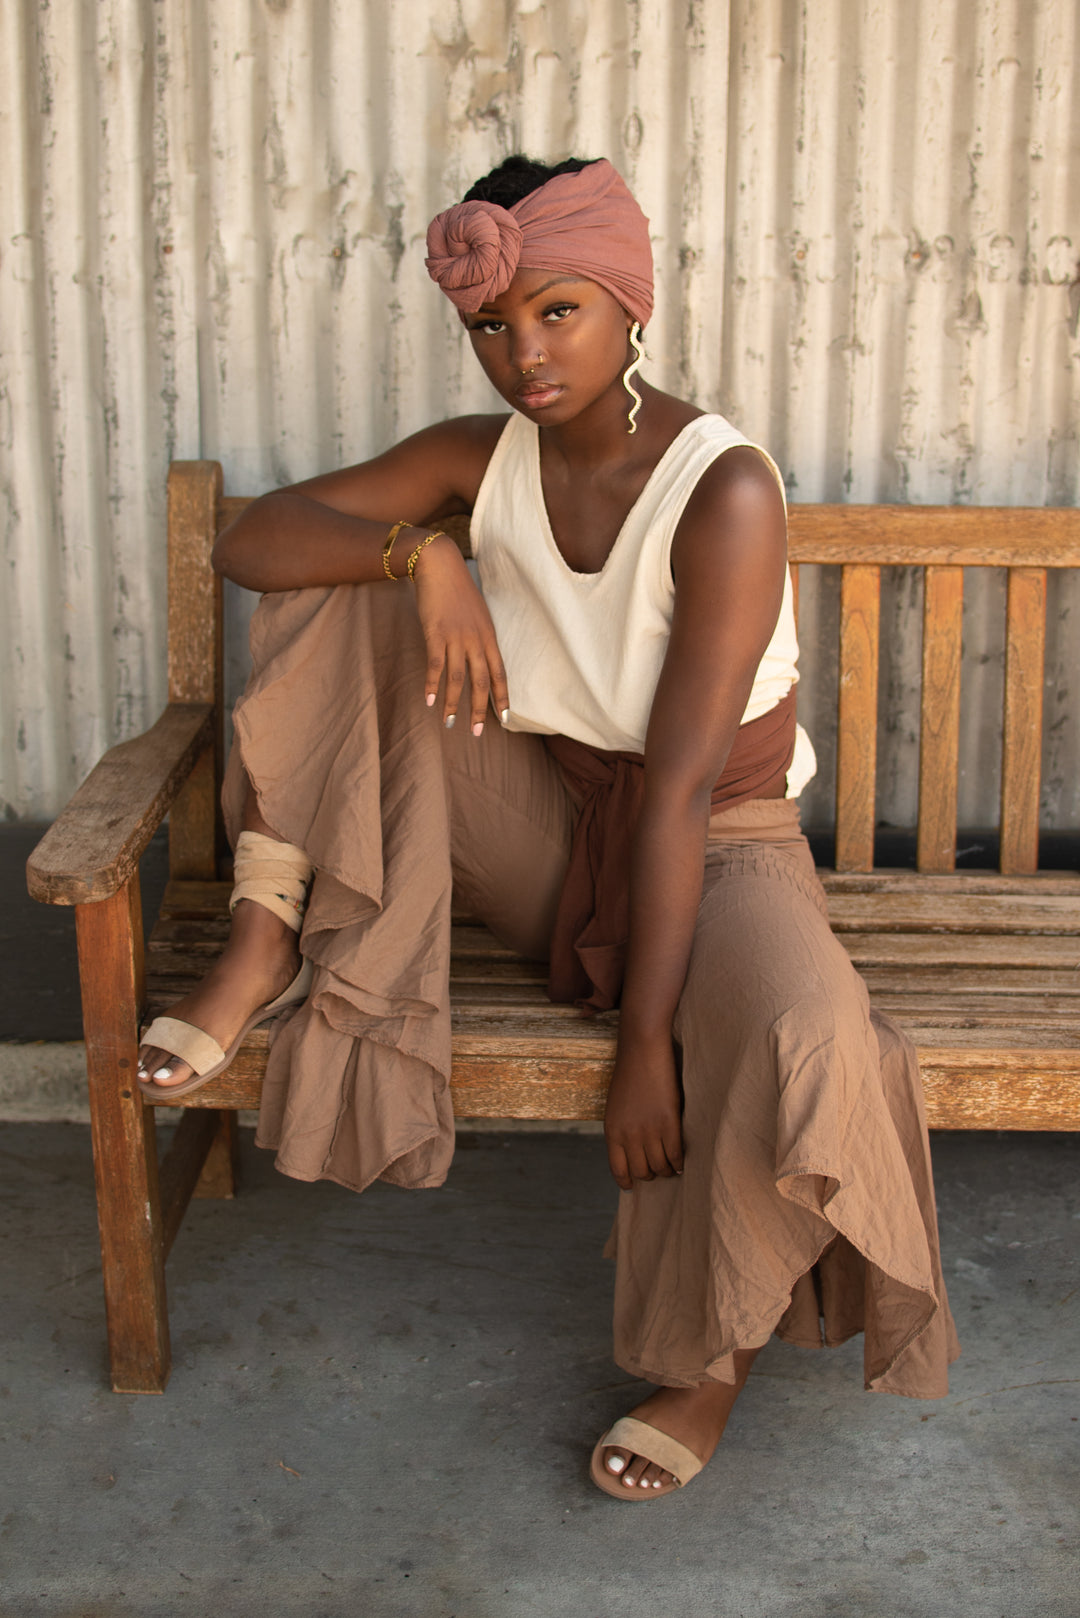 Female model sits on bench with right leg up and left leg on the ground. Her right arm is resting on her right leg. She is wearing a head wrap, white tank crop top, wrap at waist, bell bottom pants and sandals.